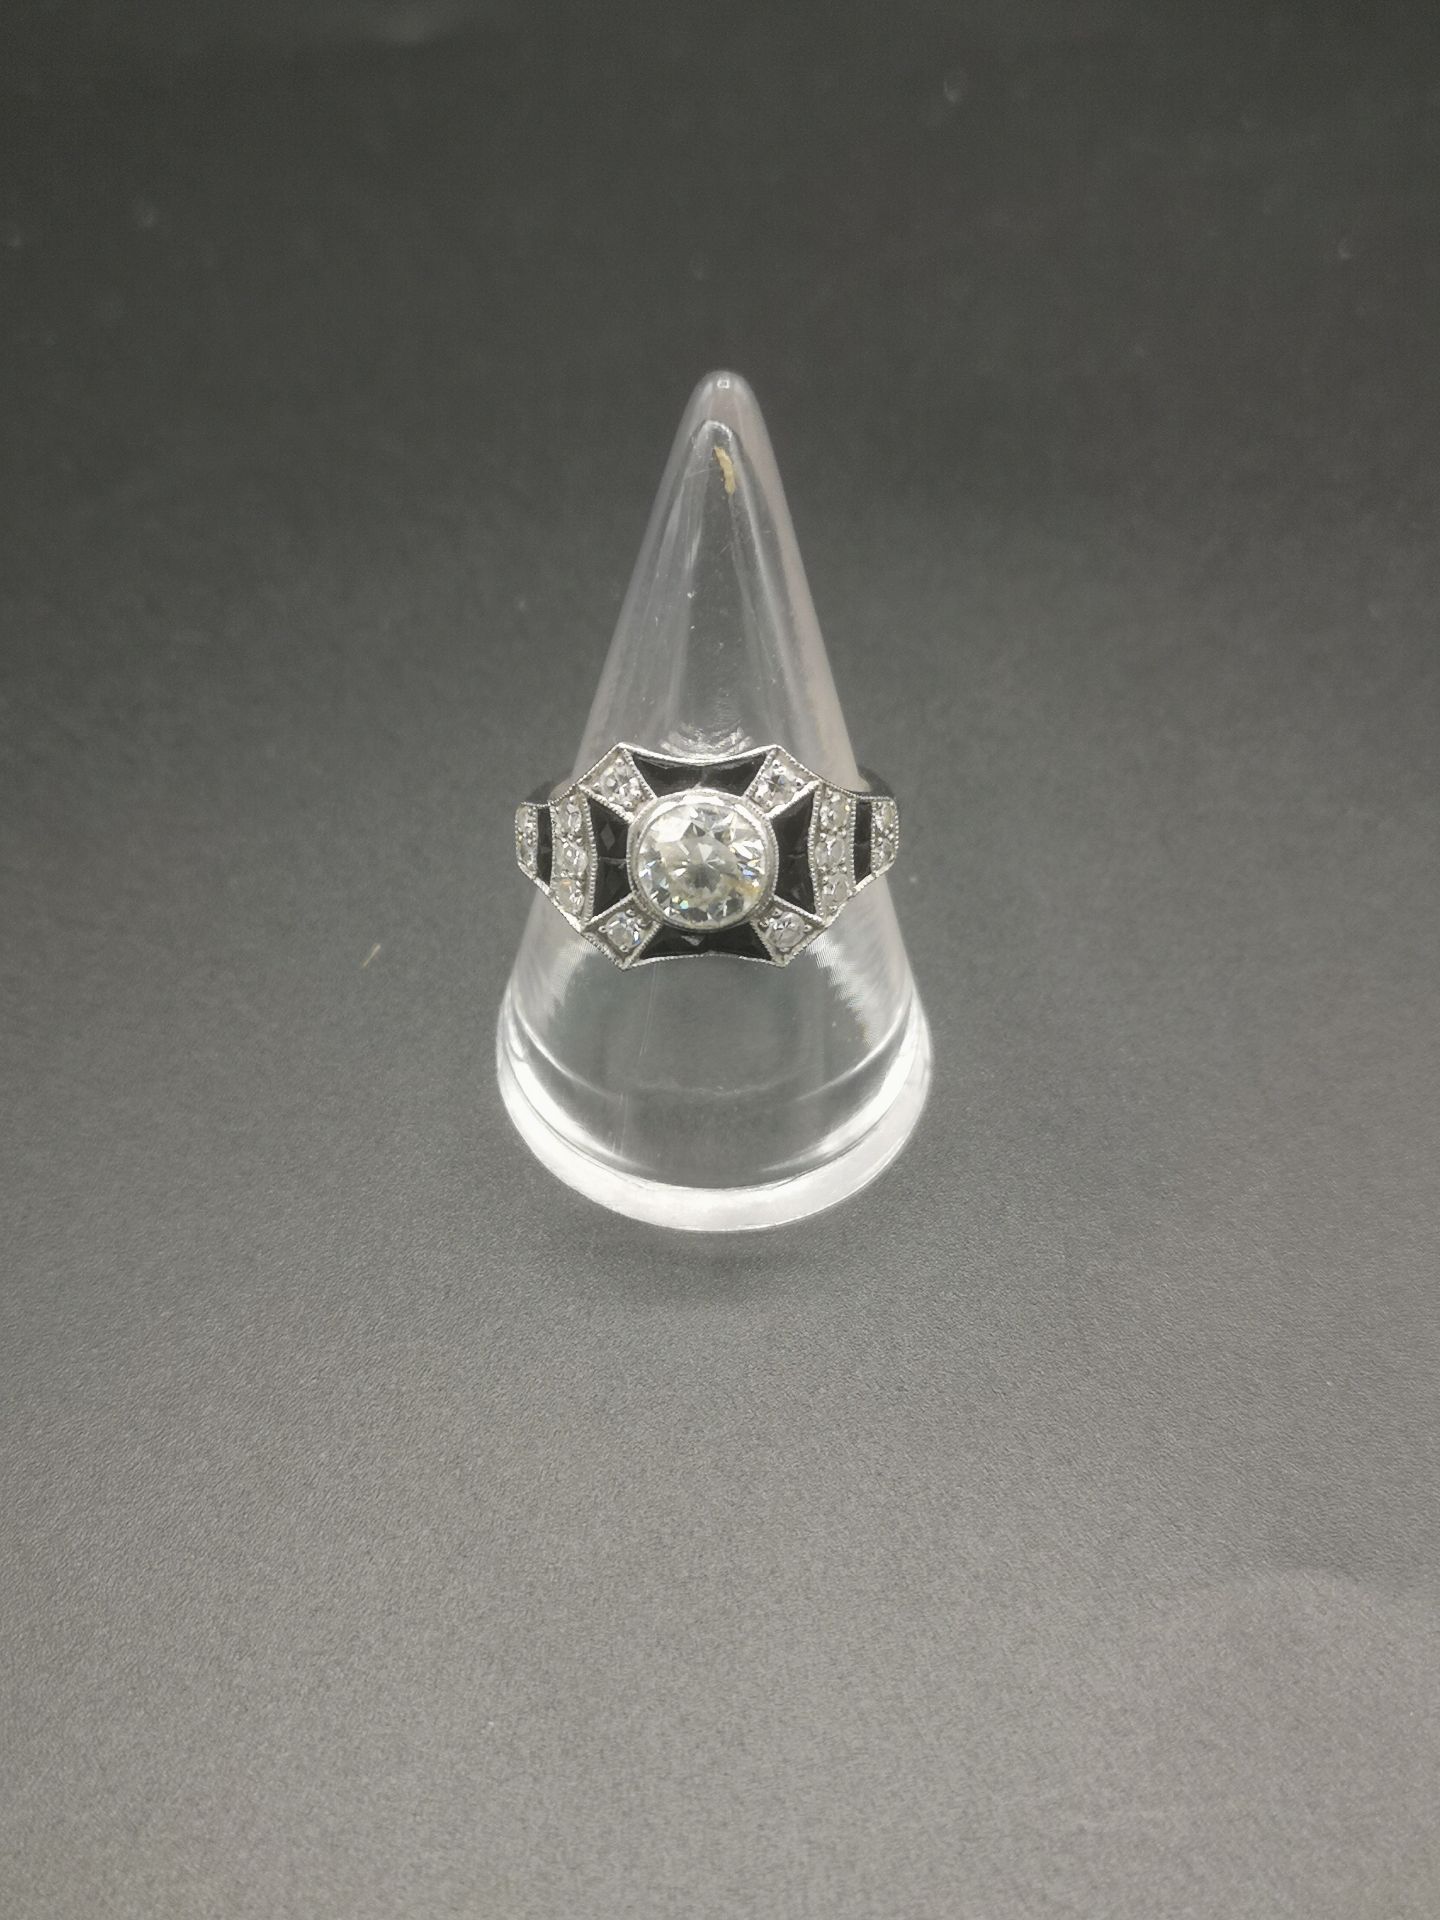 18ct white gold, diamond and black onyx ring - Image 6 of 7